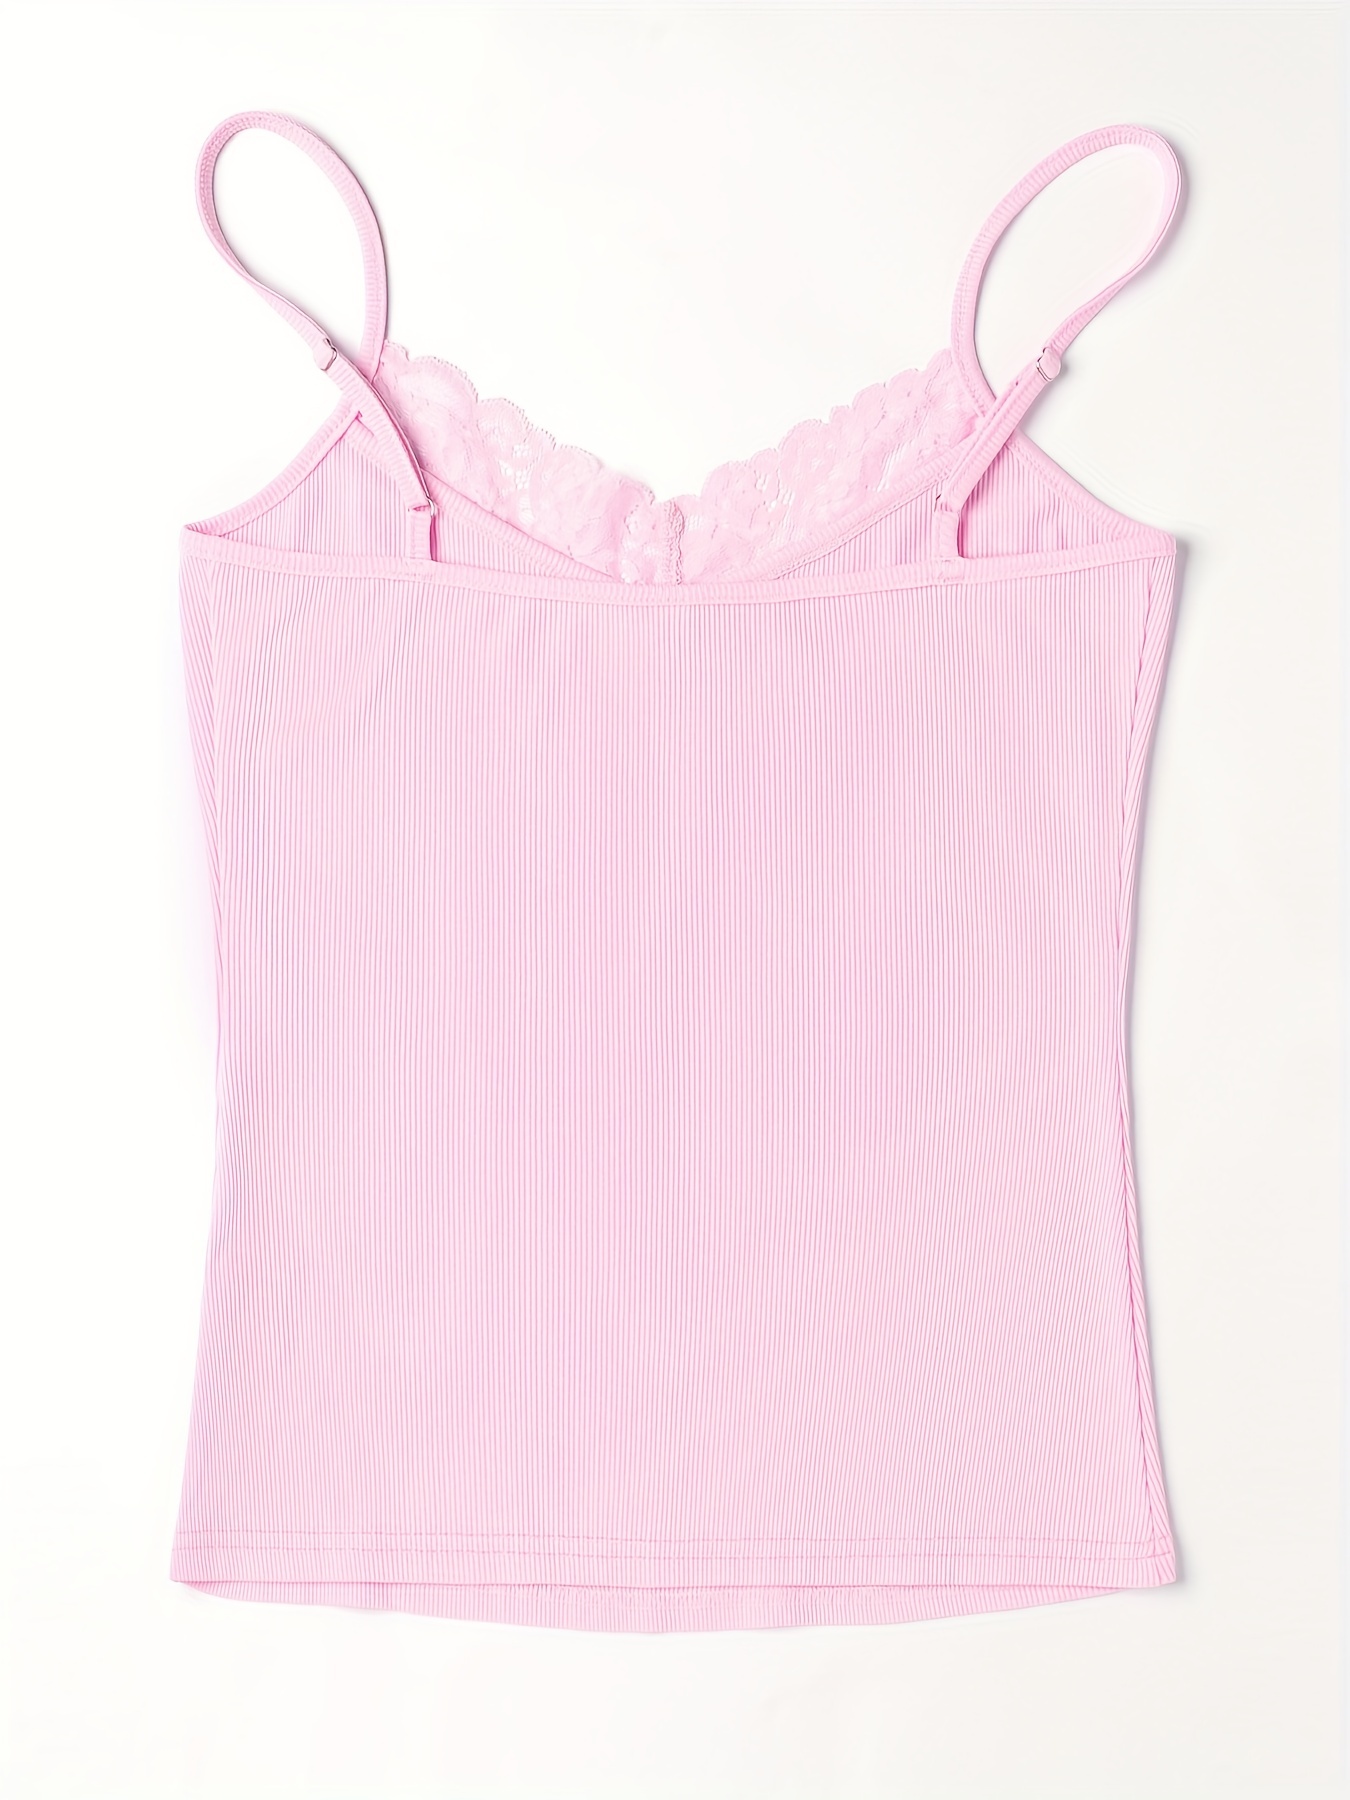 Lace-trimmed Camisole Top - Light pink - Ladies